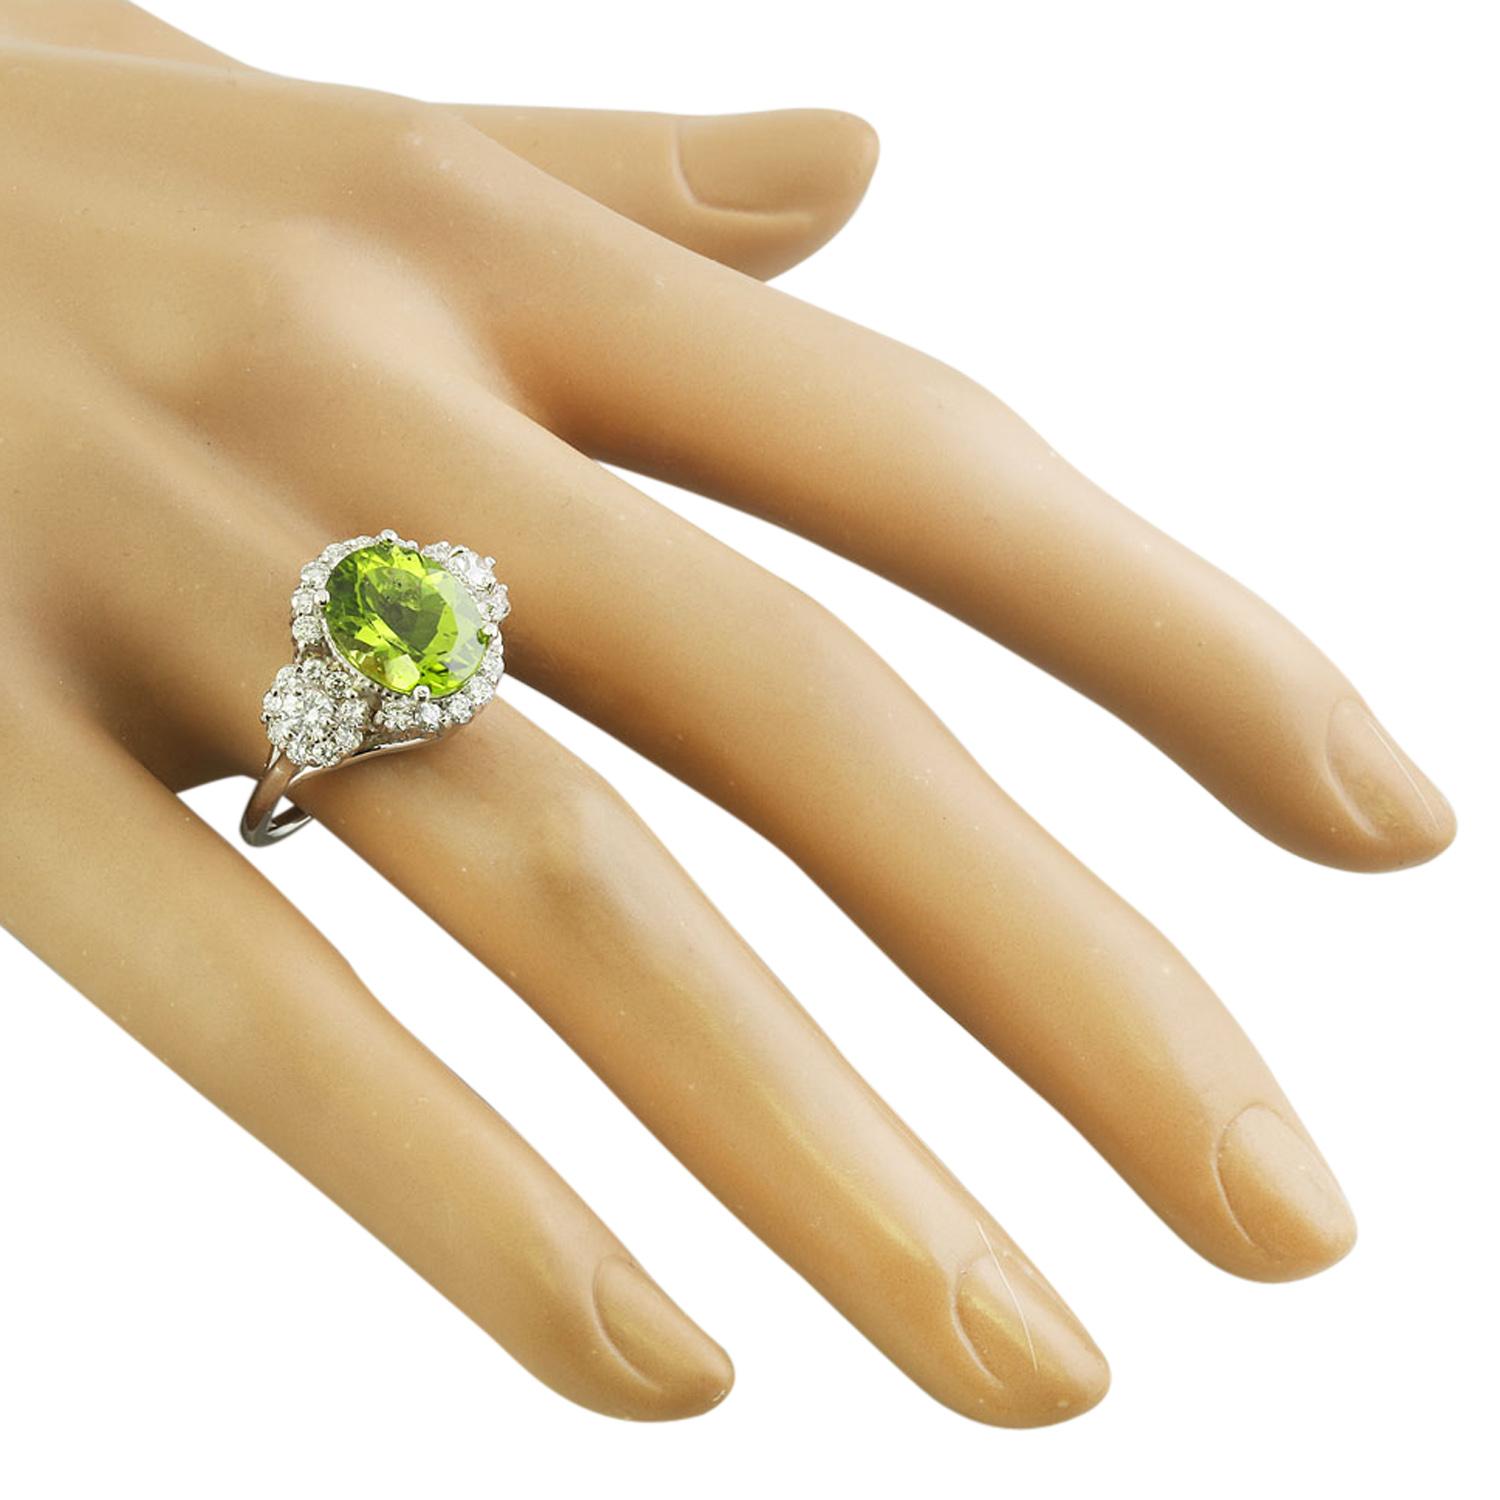 Exquisite Natural Peridot Diamond Ring In 14 Karat Solid White Gold  In New Condition For Sale In Manhattan Beach, CA